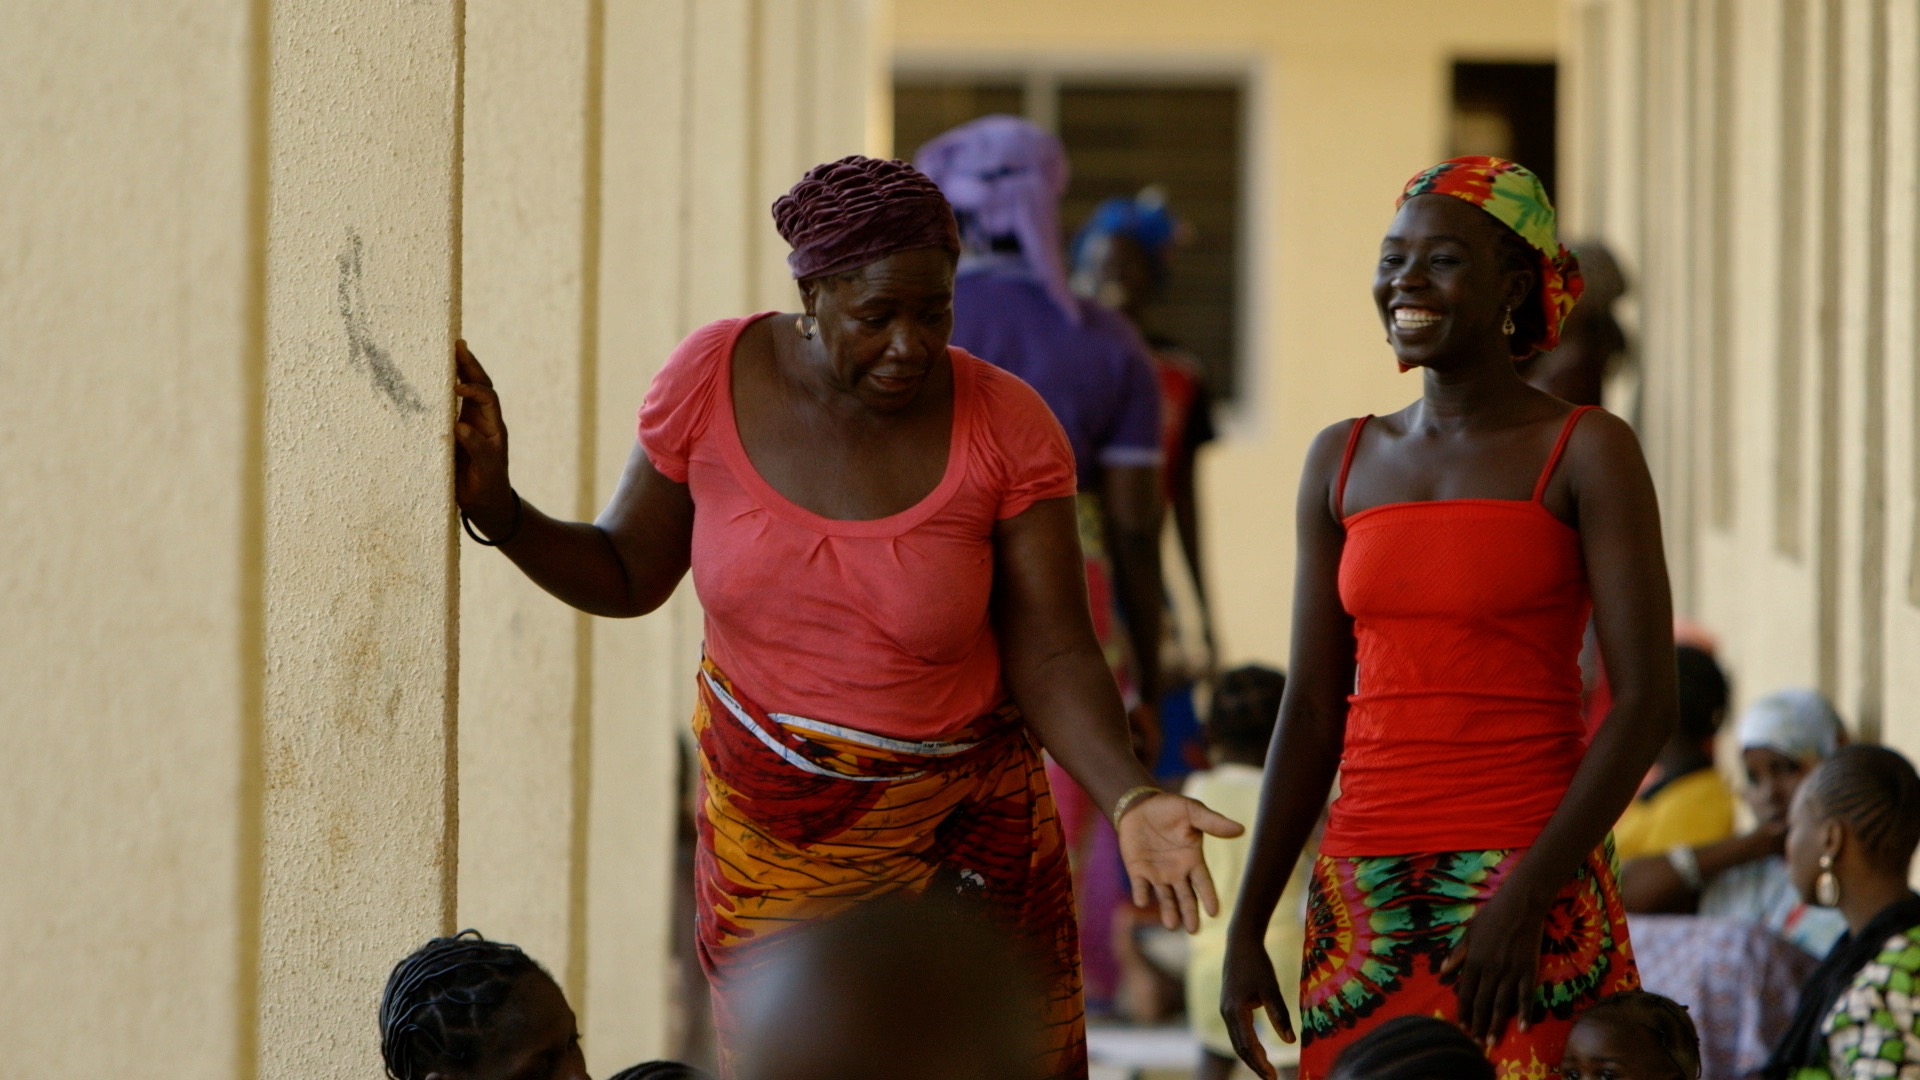 At a deradicalization camp, rescued women and girls once forced to join Boko Haram, rebuild their lives.